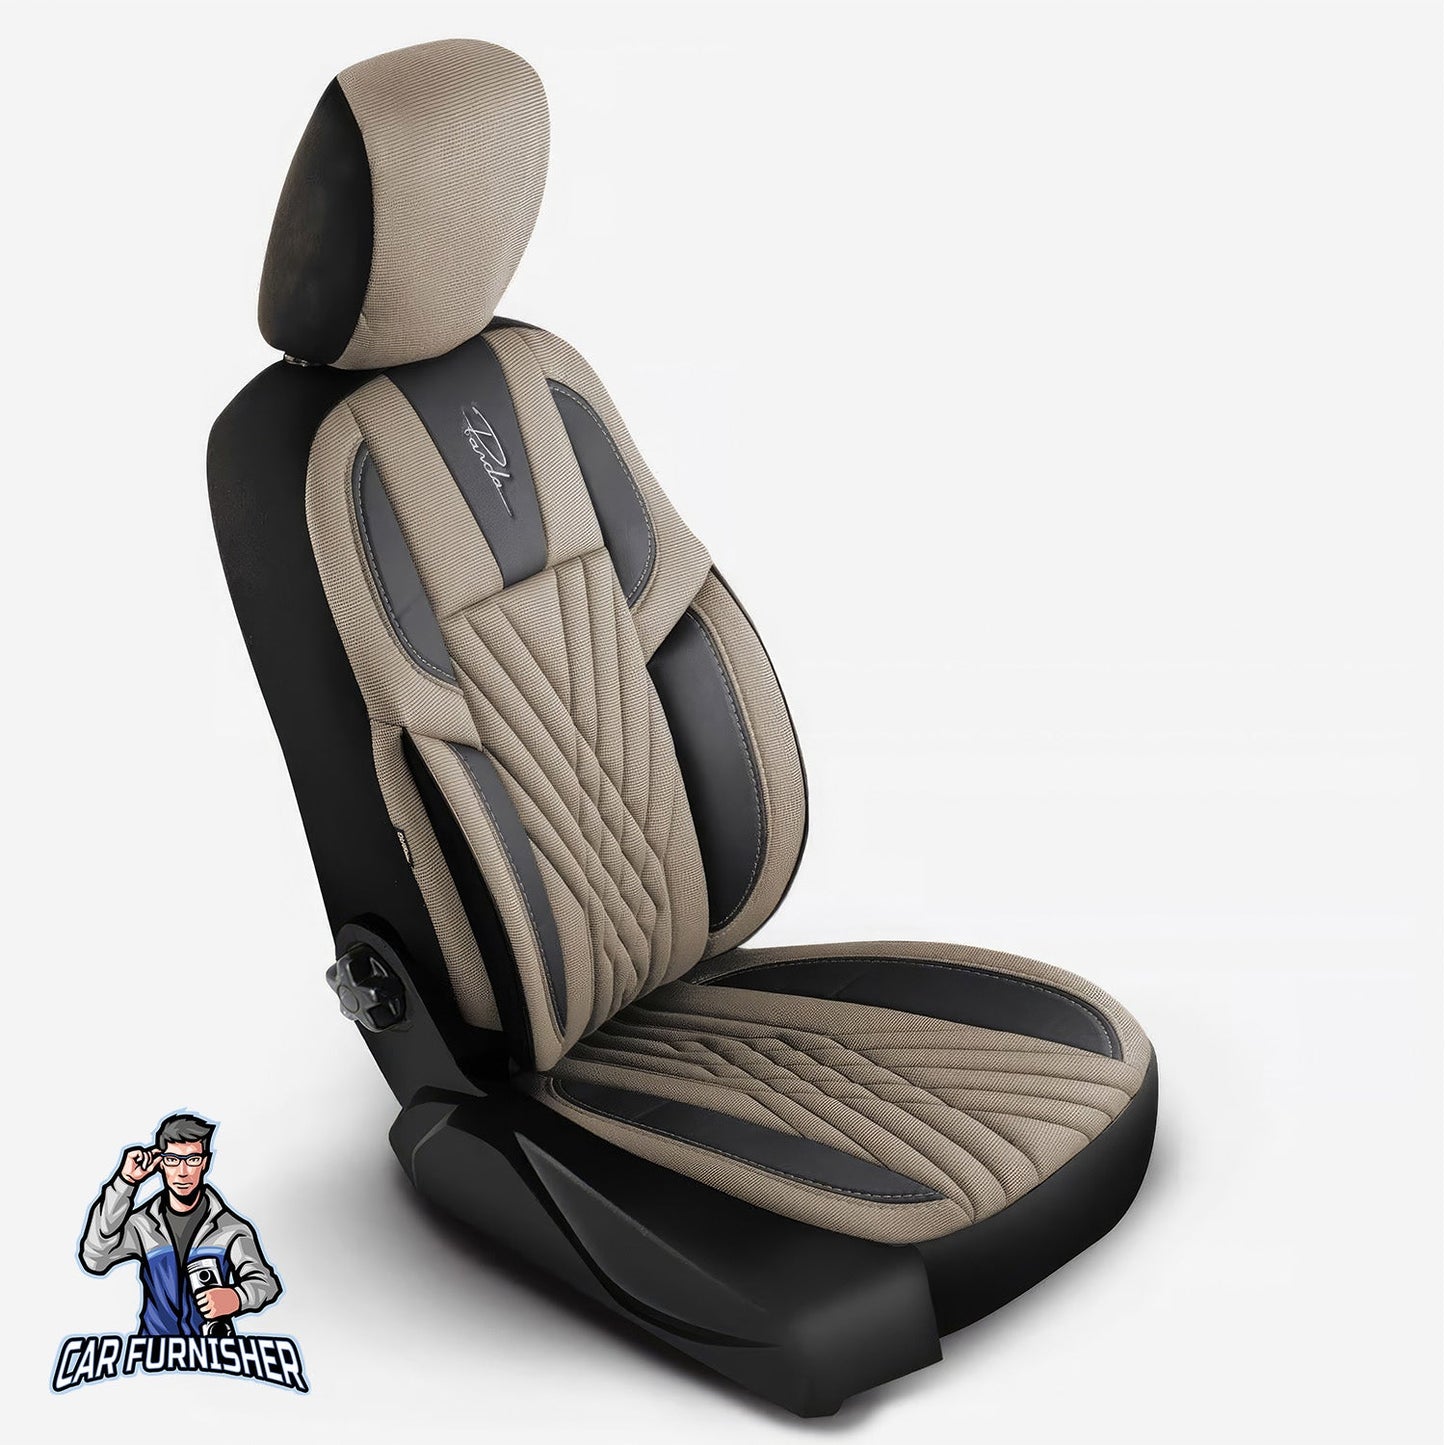 Mercedes 190 Seat Covers Vienna Design Beige 5 Seats + Headrests (Full Set) Leather & Pique Fabric